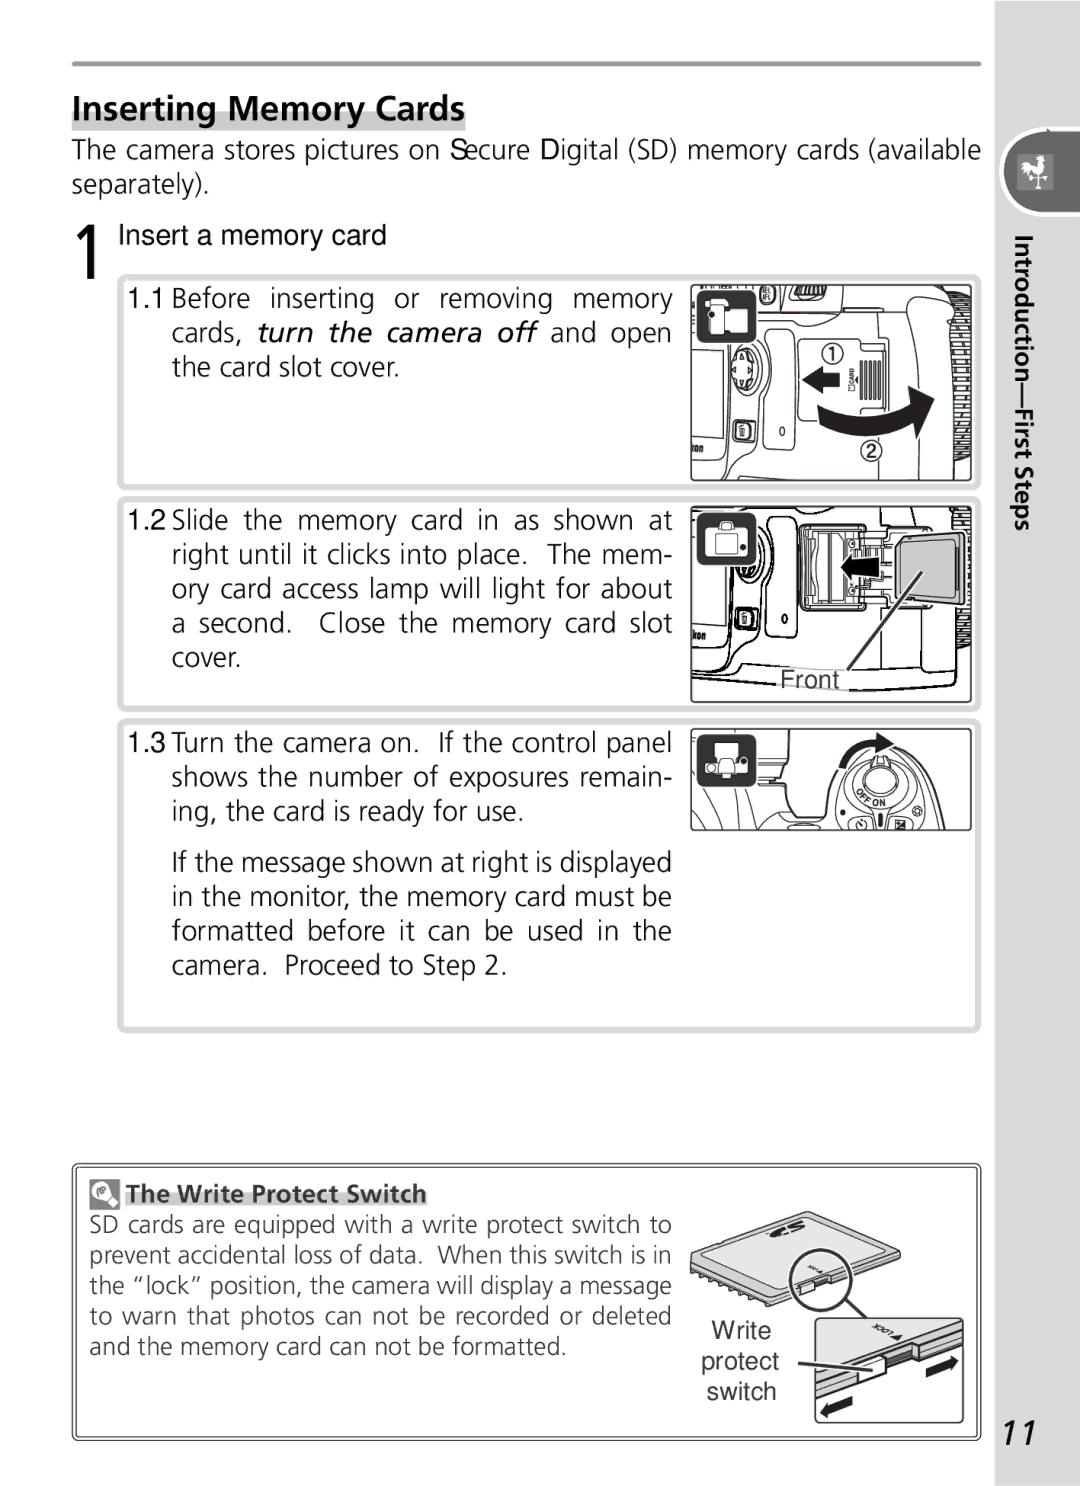 Nikon D50 manual Inserting Memory Cards, Cards, turn the camera off and open the card slot cover, Write Protect Switch 